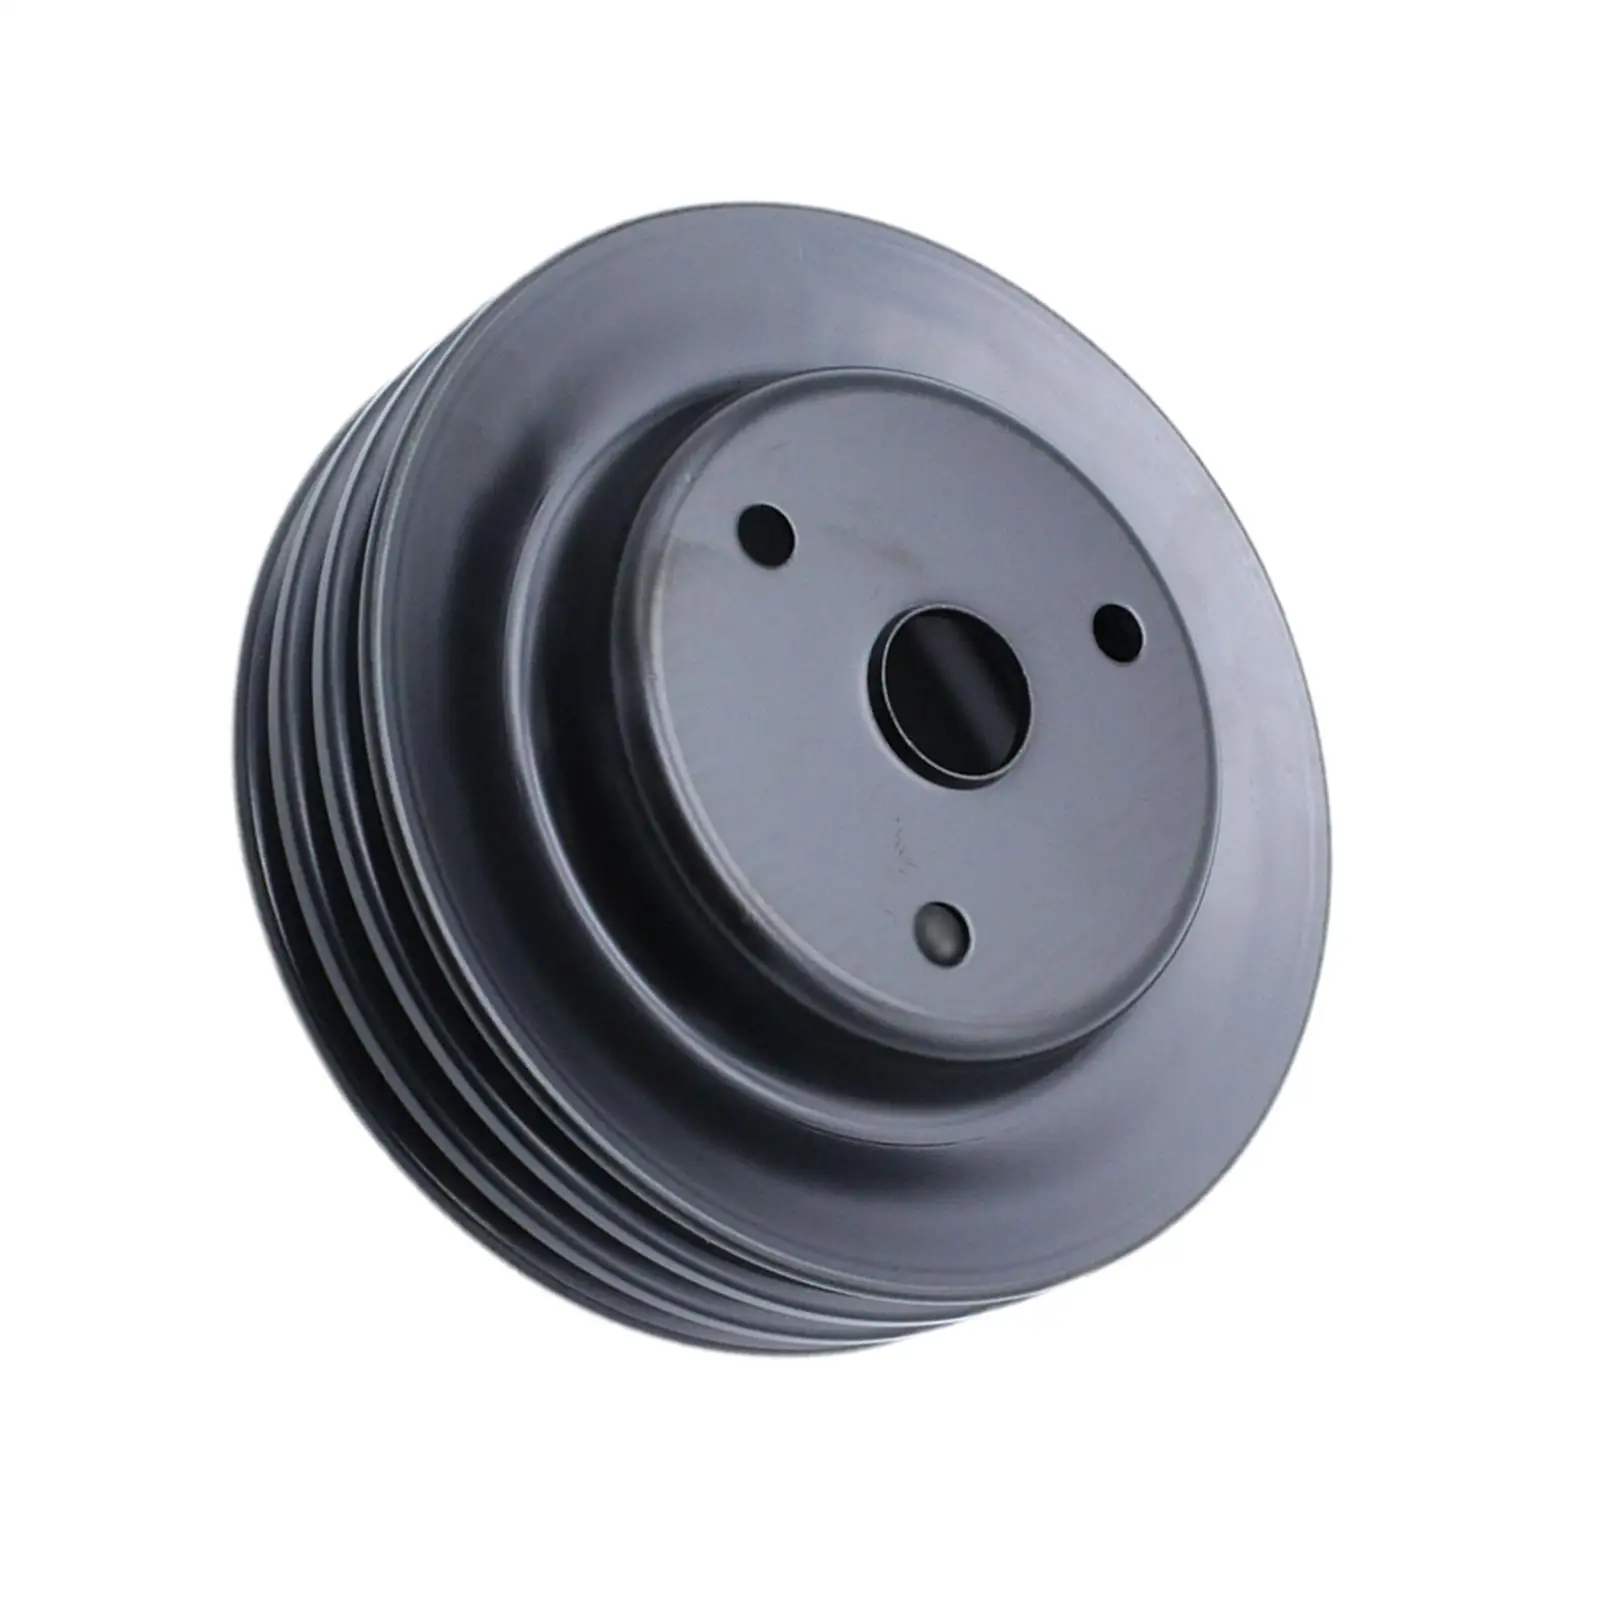 3-Groove  Pulley Lwp Pulley 7.87inch Diameter  Replacement Fits for  Power Engines Accessories Steering System Parts